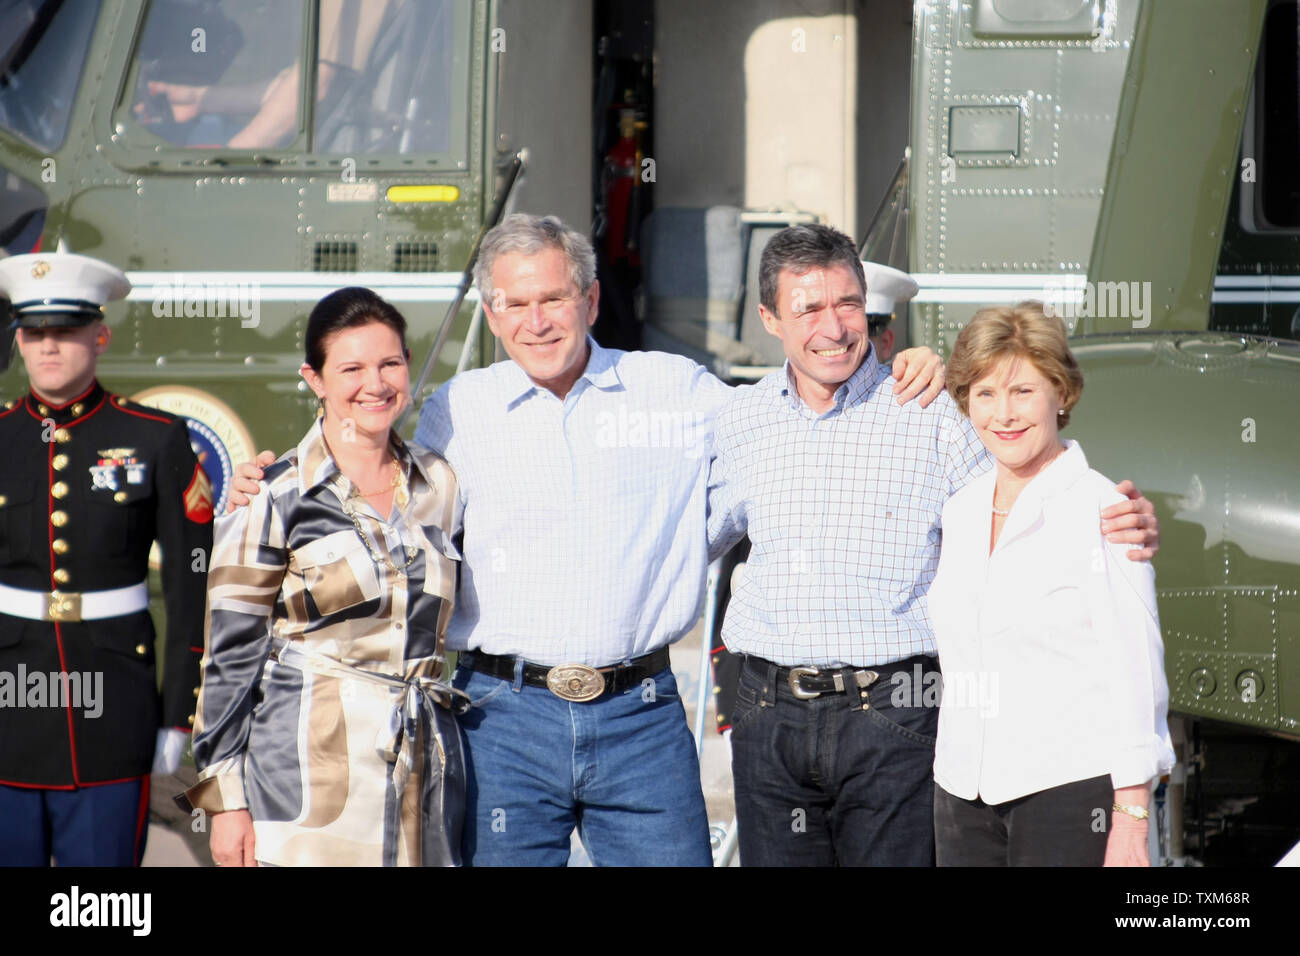 Prime Minister of Denmark Anders Fogh Rasmussen (2nd R) and his wife Anne-Mette Rasmussen (L) pose for photos with U.S. President George W. Bush (2nd L) and First Lady Laura Bush at their ranch in Crawford, Texas, February 29, 2008. President Bush will host the Prime Minister over night in Crawford. (UPI Photo/Ron Russek II) Stock Photo